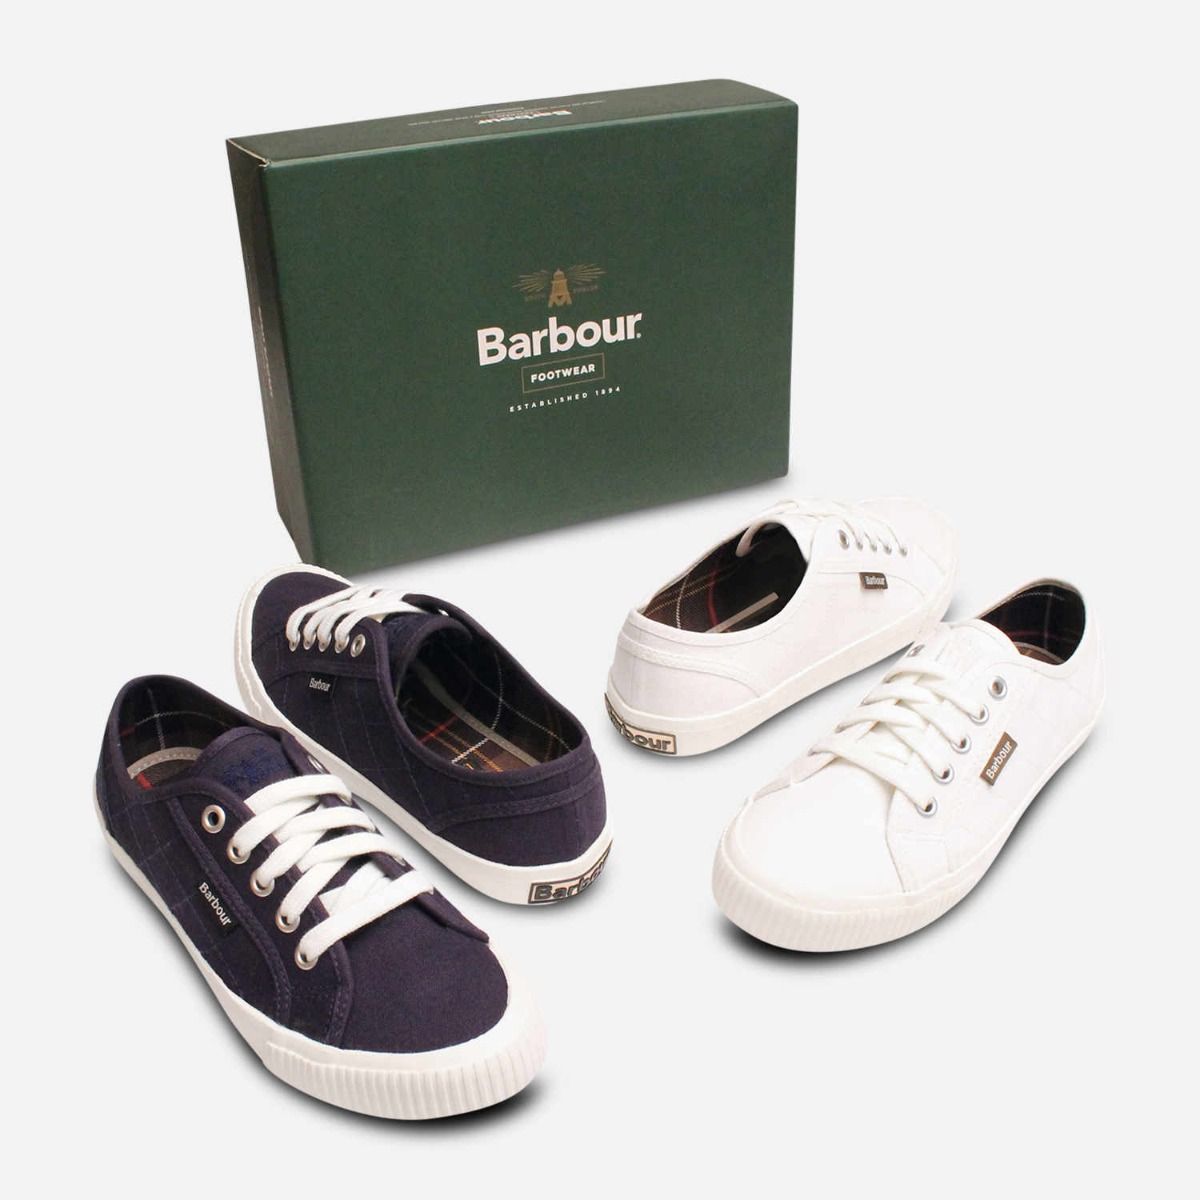 navy blue womens trainers